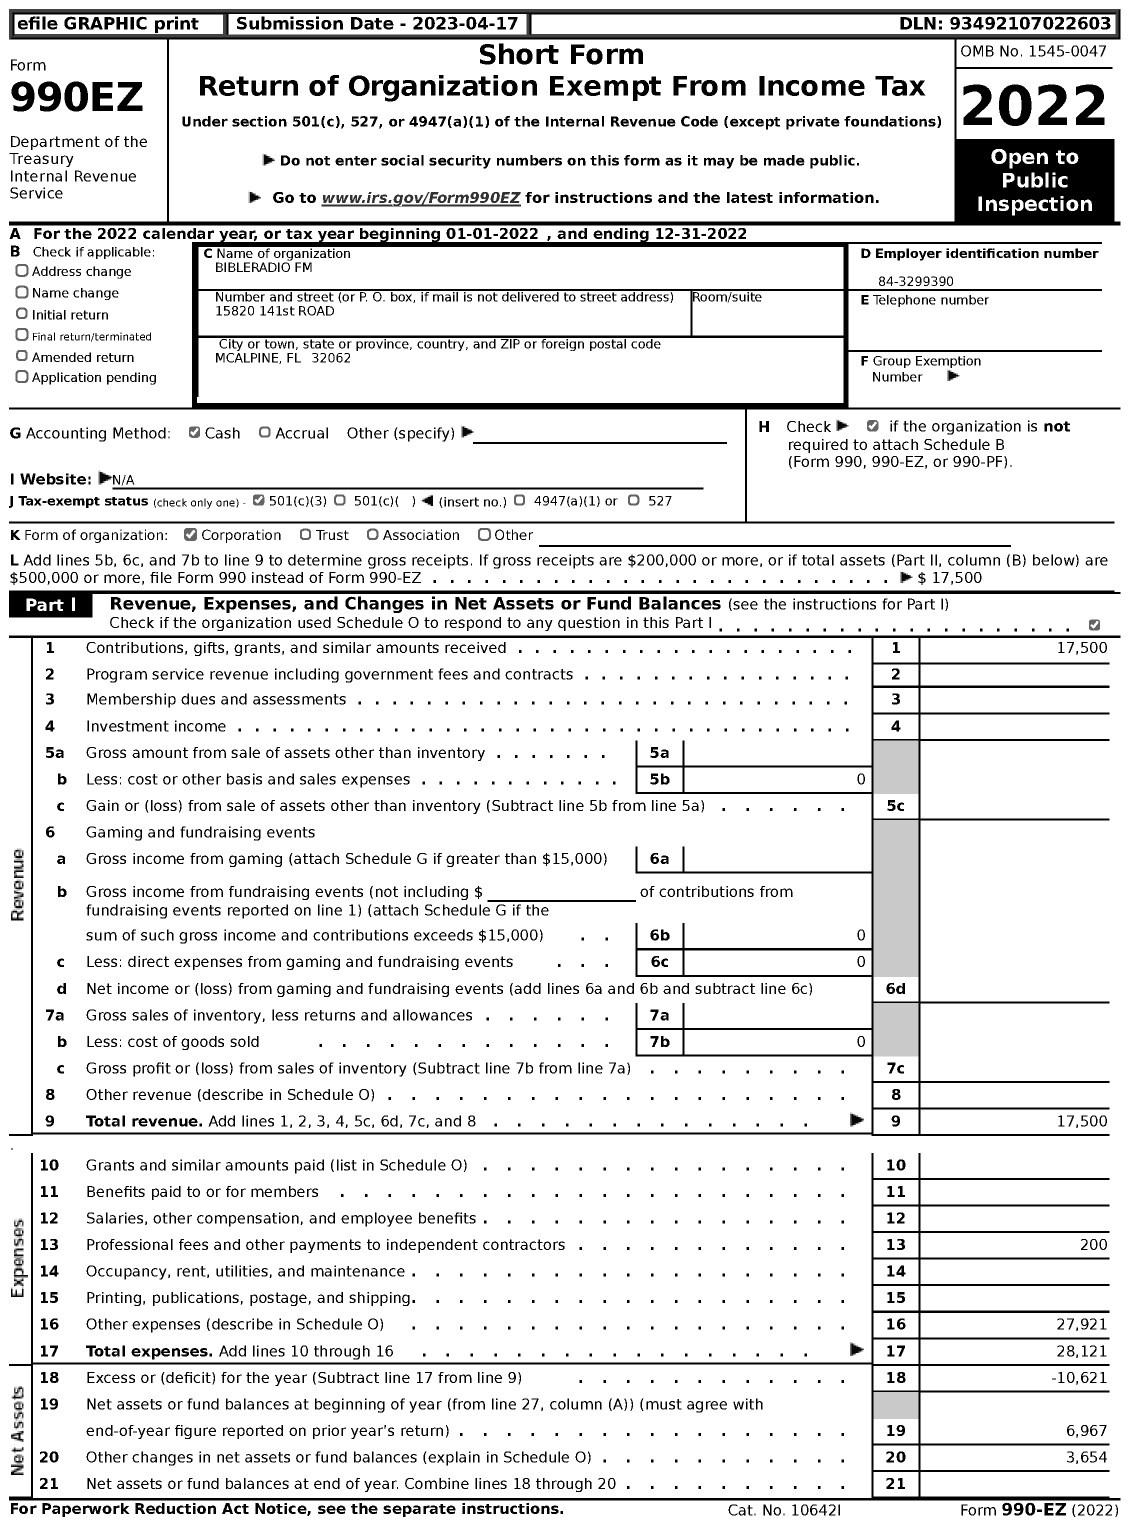 Image of first page of 2022 Form 990EZ for Bibleradio FM